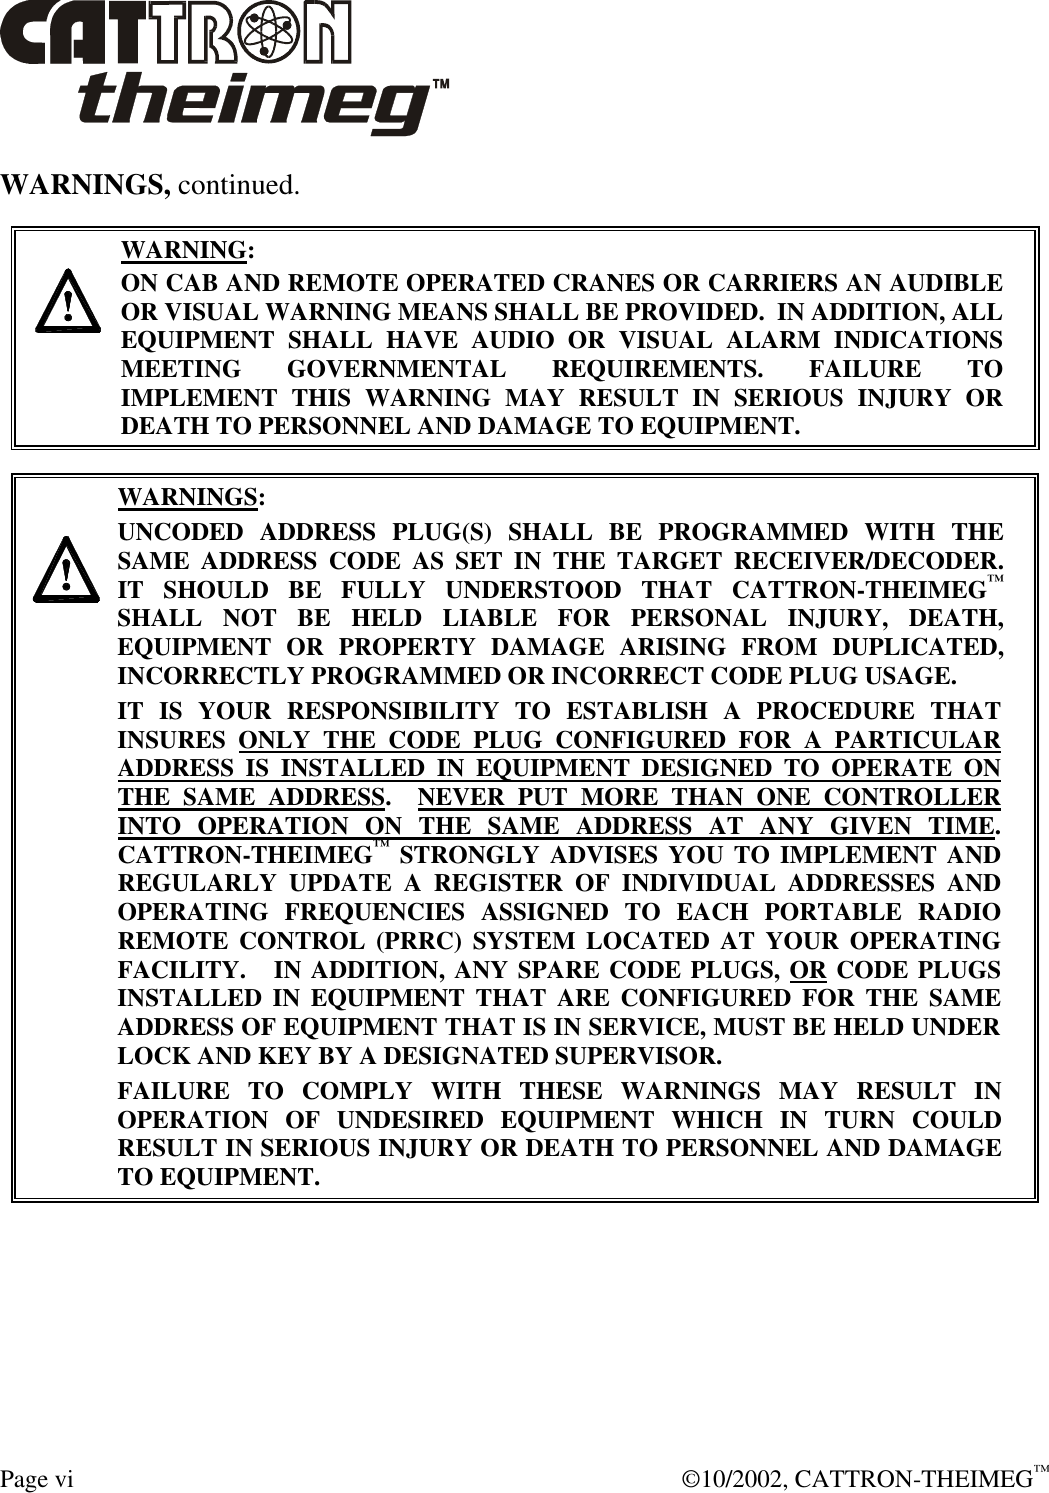  Page vi  ©10/2002, CATTRON-THEIMEG™ WARNINGS, continued.     WARNING: ON CAB AND REMOTE OPERATED CRANES OR CARRIERS AN AUDIBLE OR VISUAL WARNING MEANS SHALL BE PROVIDED.  IN ADDITION, ALL EQUIPMENT SHALL HAVE AUDIO OR VISUAL ALARM INDICATIONS MEETING GOVERNMENTAL REQUIREMENTS. FAILURE TO IMPLEMENT THIS WARNING MAY RESULT IN SERIOUS INJURY OR DEATH TO PERSONNEL AND DAMAGE TO EQUIPMENT.     WARNINGS: UNCODED ADDRESS PLUG(S) SHALL BE PROGRAMMED WITH THE SAME ADDRESS CODE AS SET IN THE TARGET RECEIVER/DECODER.   IT SHOULD BE FULLY UNDERSTOOD THAT CATTRON-THEIMEG™ SHALL NOT BE HELD LIABLE FOR PERSONAL INJURY, DEATH, EQUIPMENT OR PROPERTY DAMAGE ARISING FROM DUPLICATED, INCORRECTLY PROGRAMMED OR INCORRECT CODE PLUG USAGE. IT IS YOUR RESPONSIBILITY TO ESTABLISH A PROCEDURE THAT INSURES ONLY THE CODE PLUG CONFIGURED FOR A PARTICULAR ADDRESS IS INSTALLED IN EQUIPMENT DESIGNED TO OPERATE ON THE SAME ADDRESS.  NEVER PUT MORE THAN ONE CONTROLLER INTO OPERATION ON THE SAME ADDRESS AT ANY GIVEN TIME.  CATTRON-THEIMEG™ STRONGLY ADVISES YOU TO IMPLEMENT AND REGULARLY UPDATE A REGISTER OF INDIVIDUAL ADDRESSES AND OPERATING FREQUENCIES ASSIGNED TO EACH PORTABLE RADIO REMOTE CONTROL (PRRC) SYSTEM LOCATED AT YOUR OPERATING FACILITY.   IN ADDITION, ANY SPARE CODE PLUGS, OR CODE PLUGS INSTALLED IN EQUIPMENT THAT ARE CONFIGURED FOR THE SAME ADDRESS OF EQUIPMENT THAT IS IN SERVICE, MUST BE HELD UNDER LOCK AND KEY BY A DESIGNATED SUPERVISOR.   FAILURE TO COMPLY WITH THESE WARNINGS MAY RESULT IN OPERATION OF UNDESIRED EQUIPMENT WHICH IN TURN COULD RESULT IN SERIOUS INJURY OR DEATH TO PERSONNEL AND DAMAGE TO EQUIPMENT.  